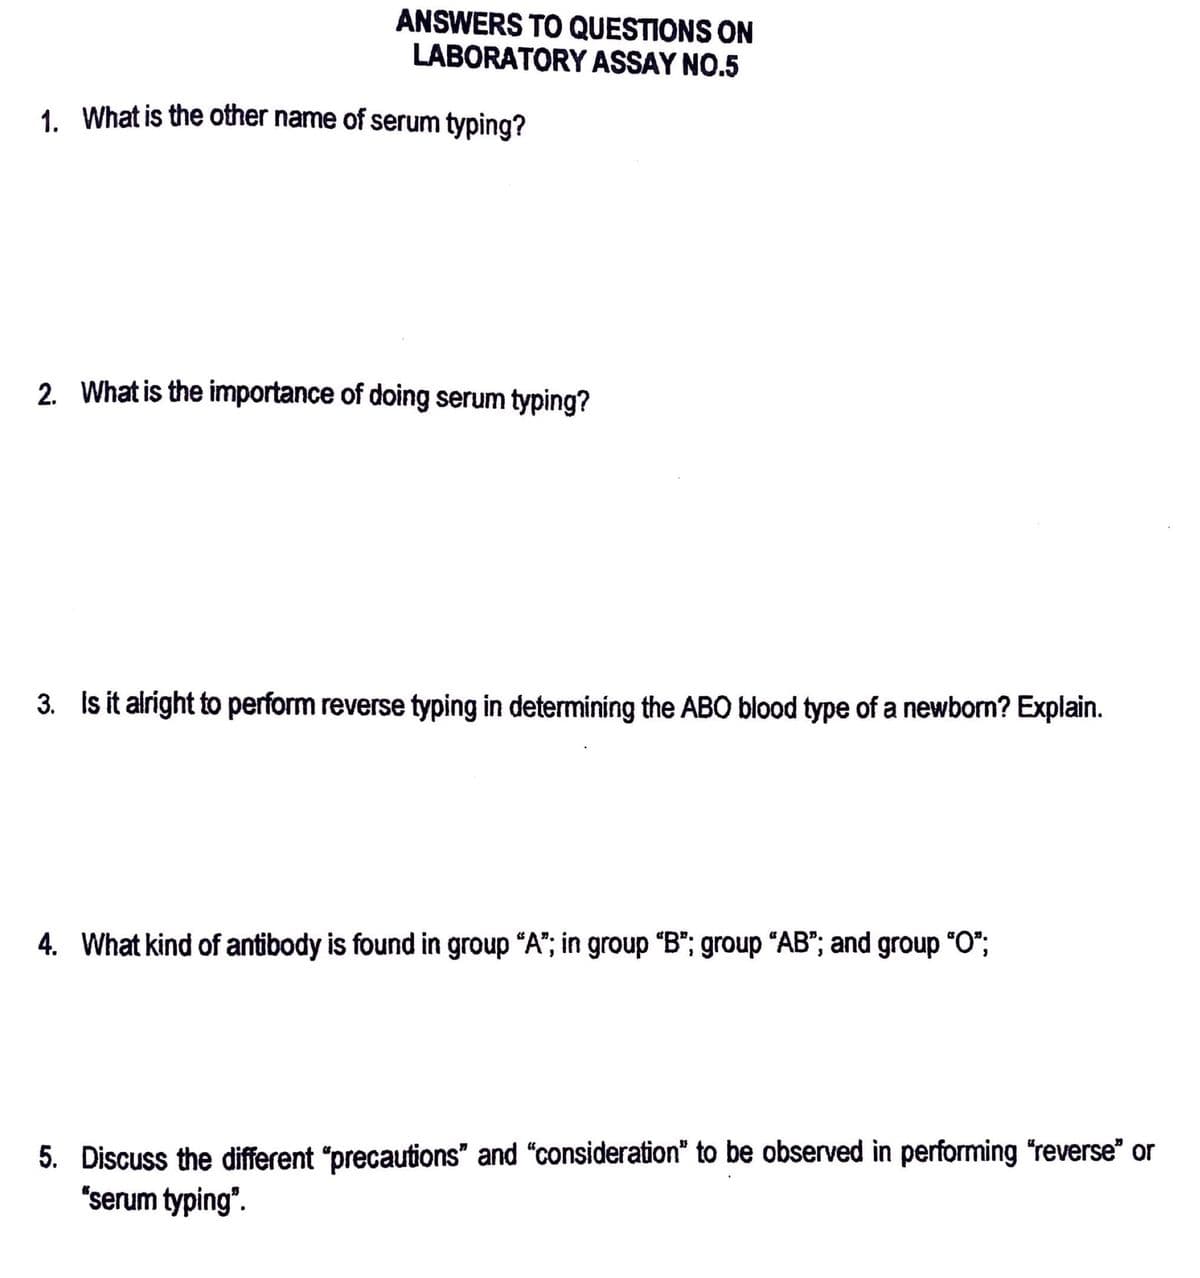 ANSWERS TO QUESTIONS ON
LABORATORY ASSAY NO.5
1. What is the other name of serum typing?
2. What is the importance of doing serum typing?
3. Is it alright to perform reverse typing in determining the ABO blood type of a newborn? Explain.
4. What kind of antibody is found in group "A"; in group "B"; group "AB"; and group “O”;
5. Discuss the different "precautions" and "consideration" to be observed in performing "reverse" or
"serum typing".